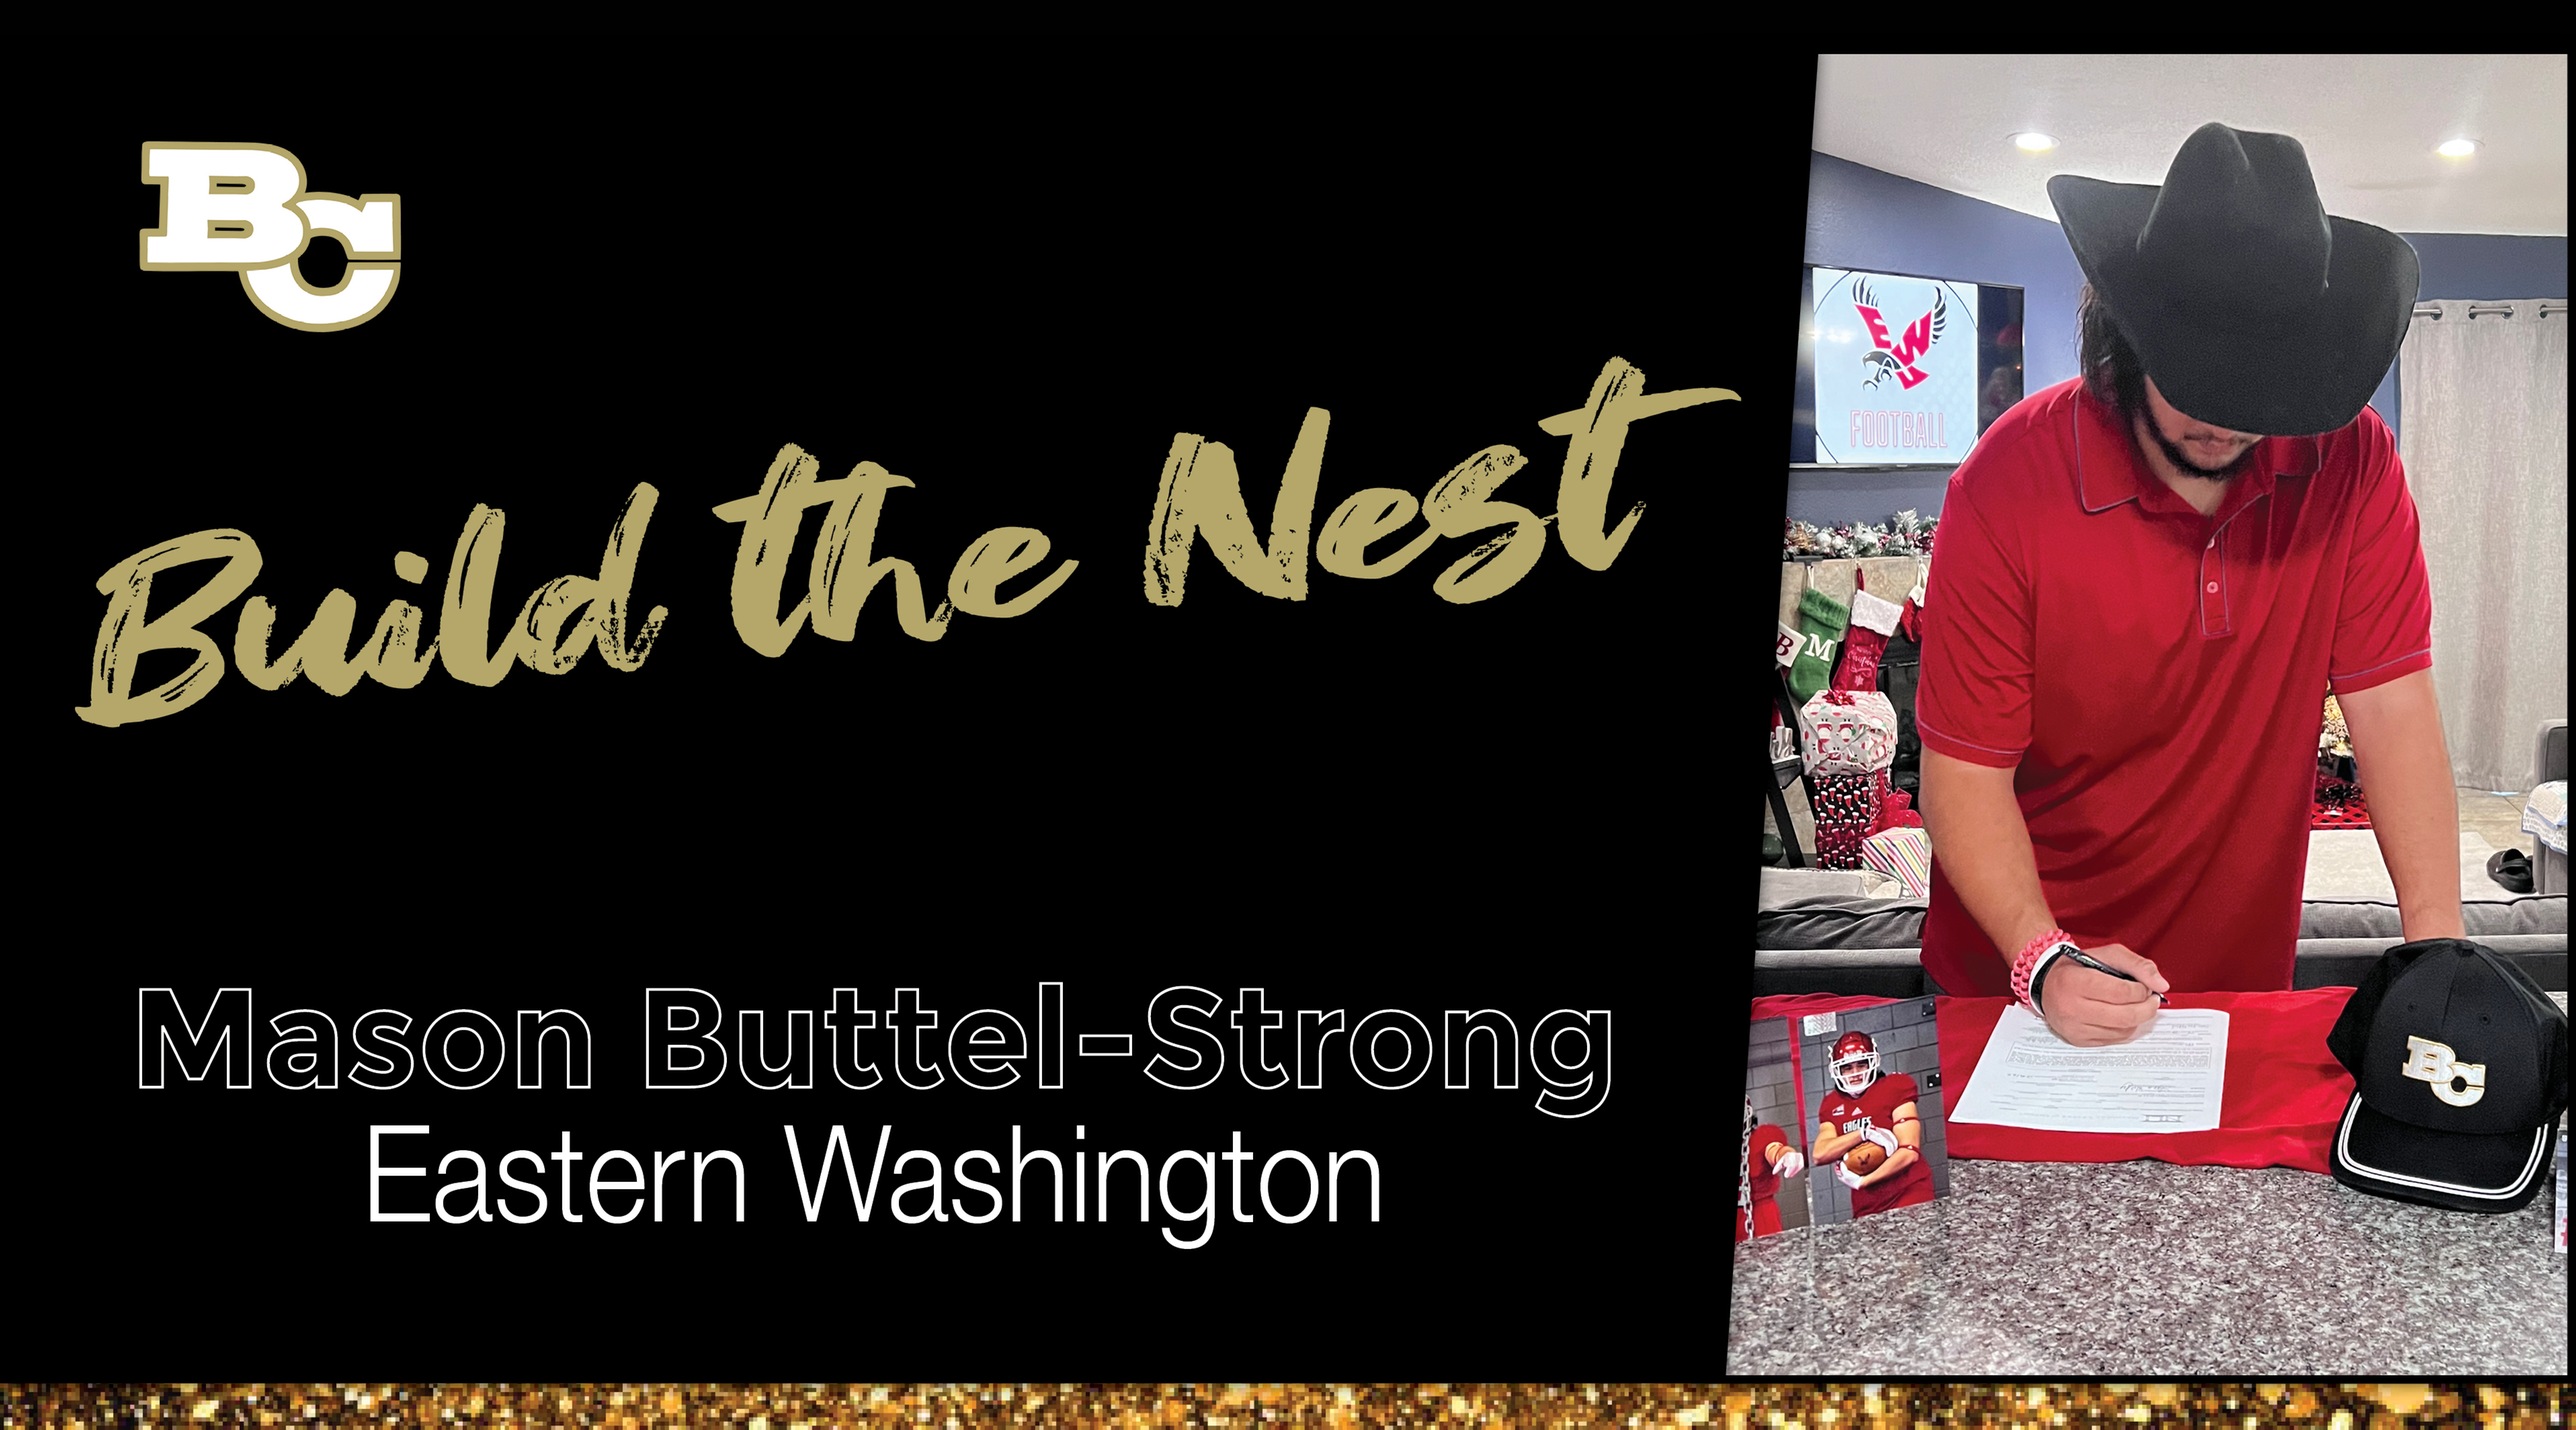 Buttel-Strong Signs with Eastern Washington